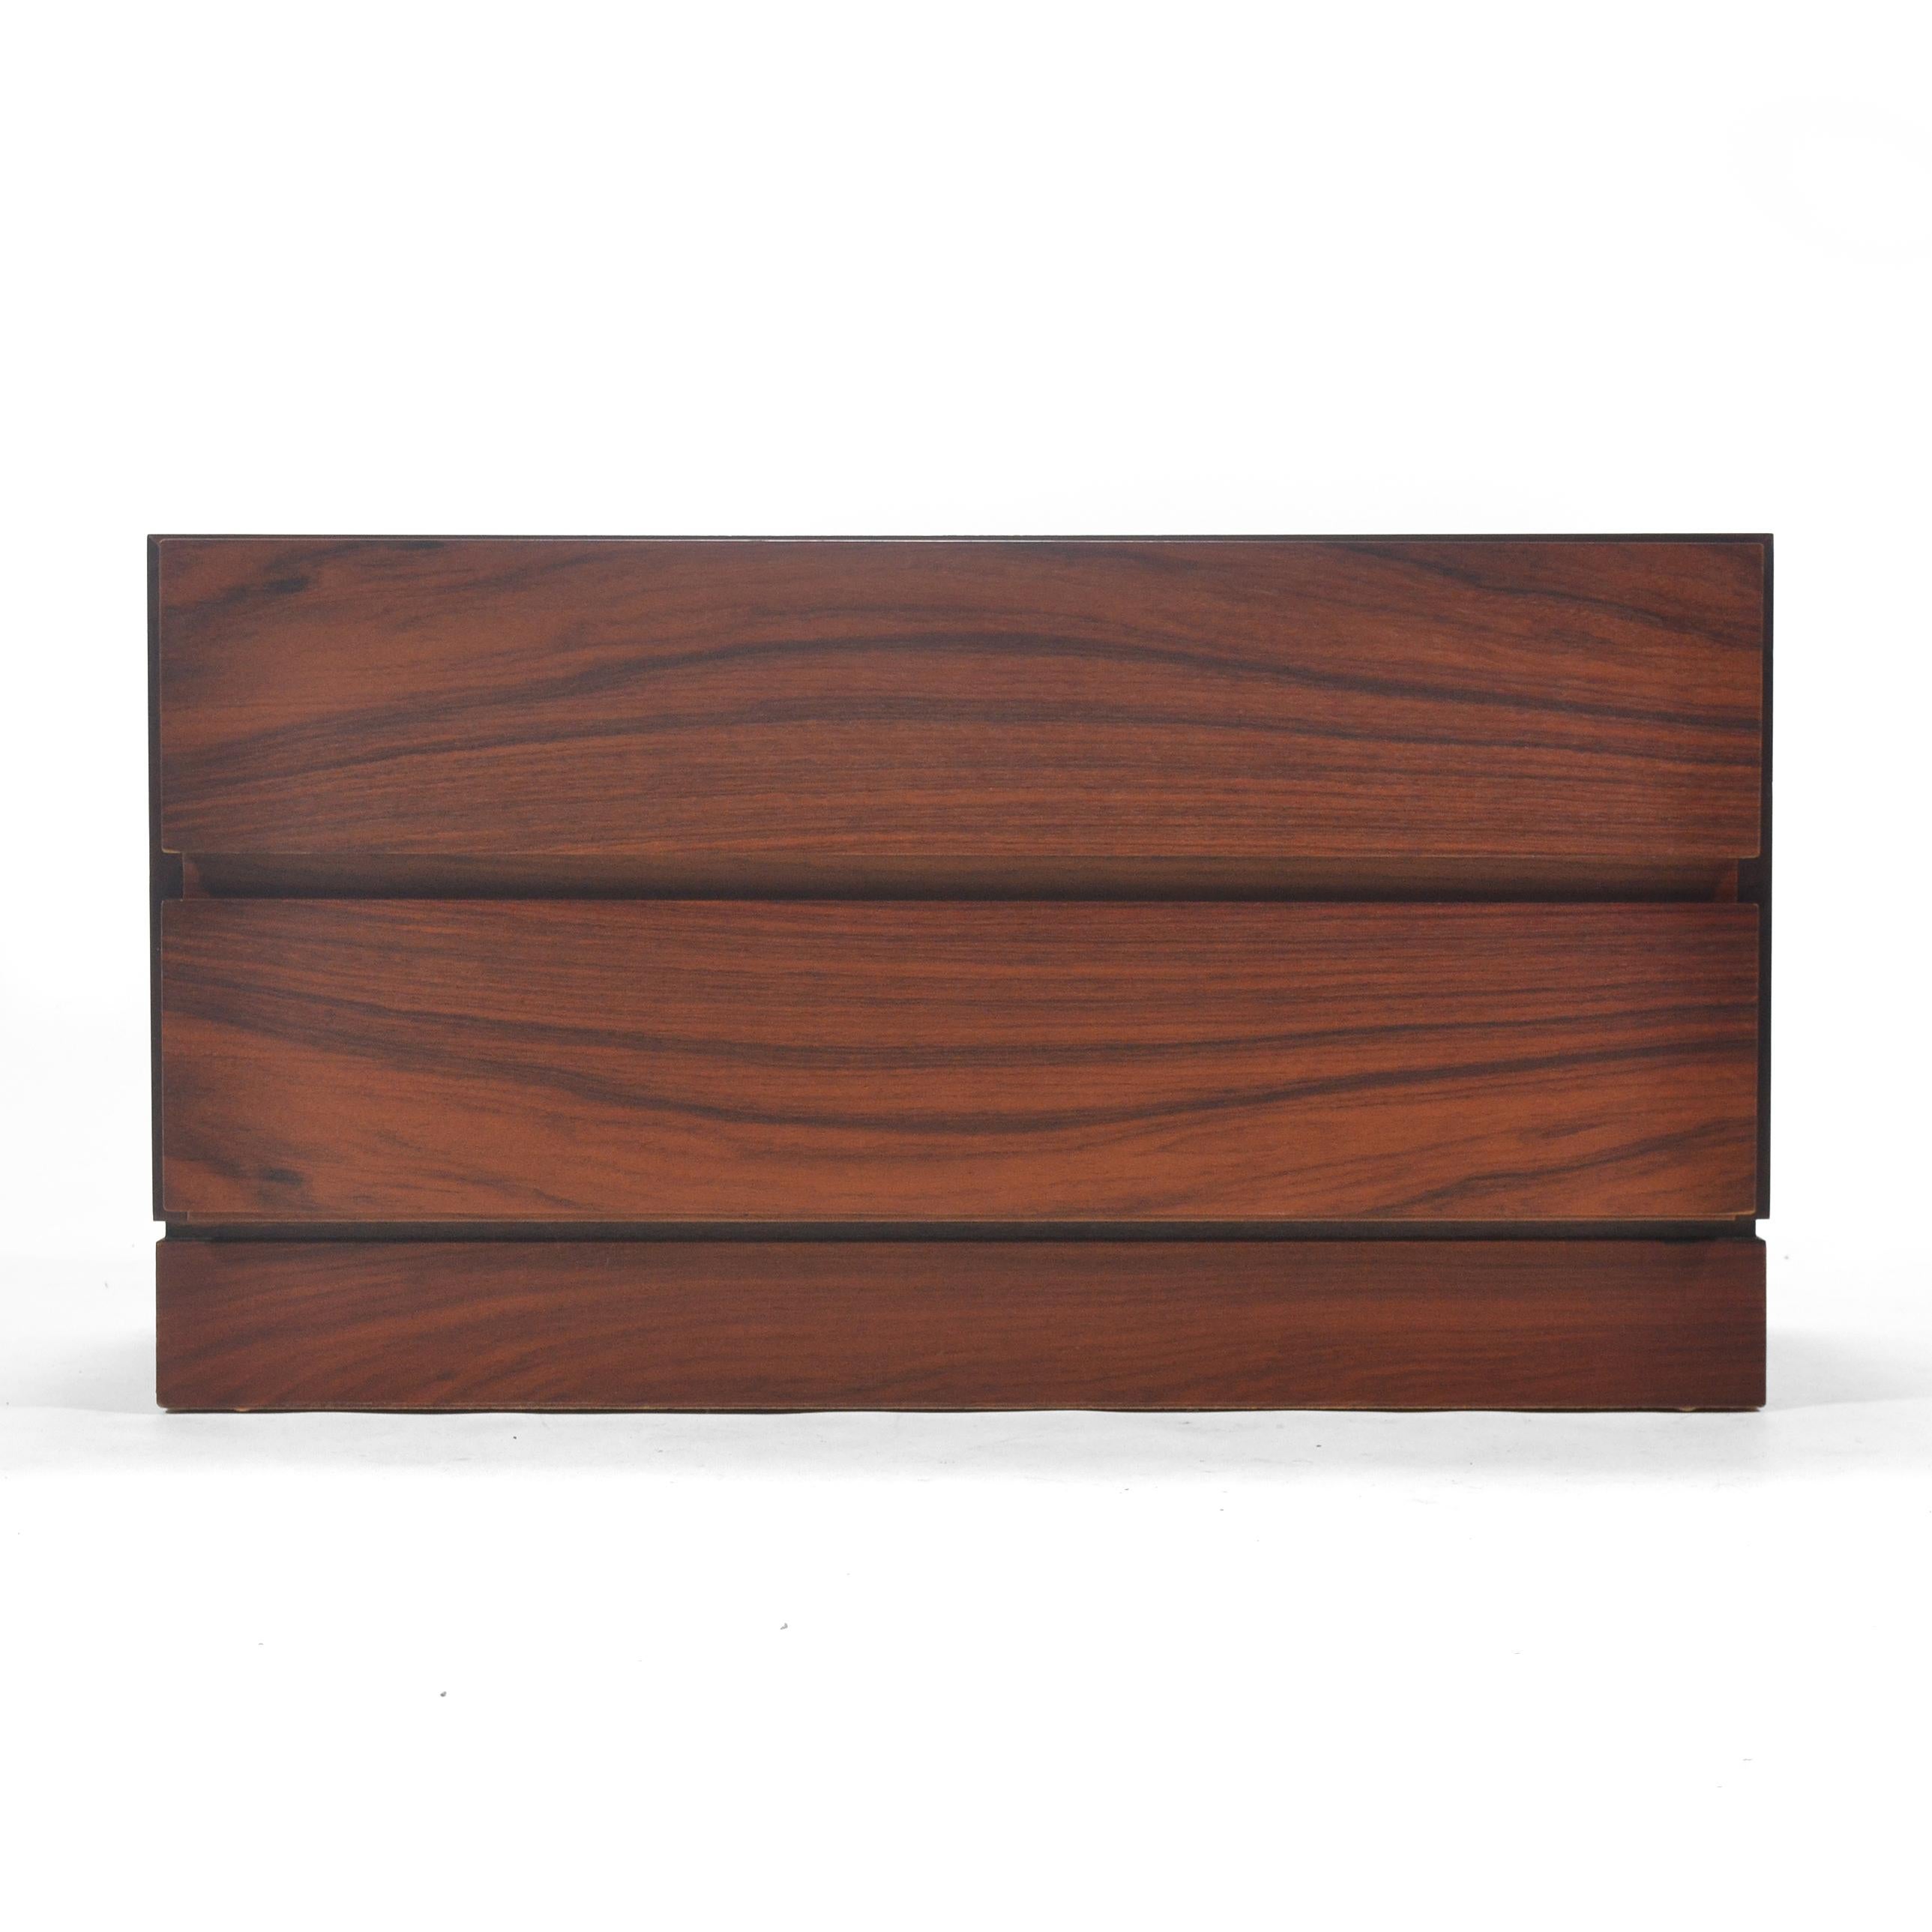 This handsome Danish two-drawer cabinet designed by Arne Wahl Iversen for Vinde Mobelfabrik is clad in beautiful, rich rosewood, has a plinth base, and an unusual scale which also allows it to serve as a riser, a pedestal, or end table.